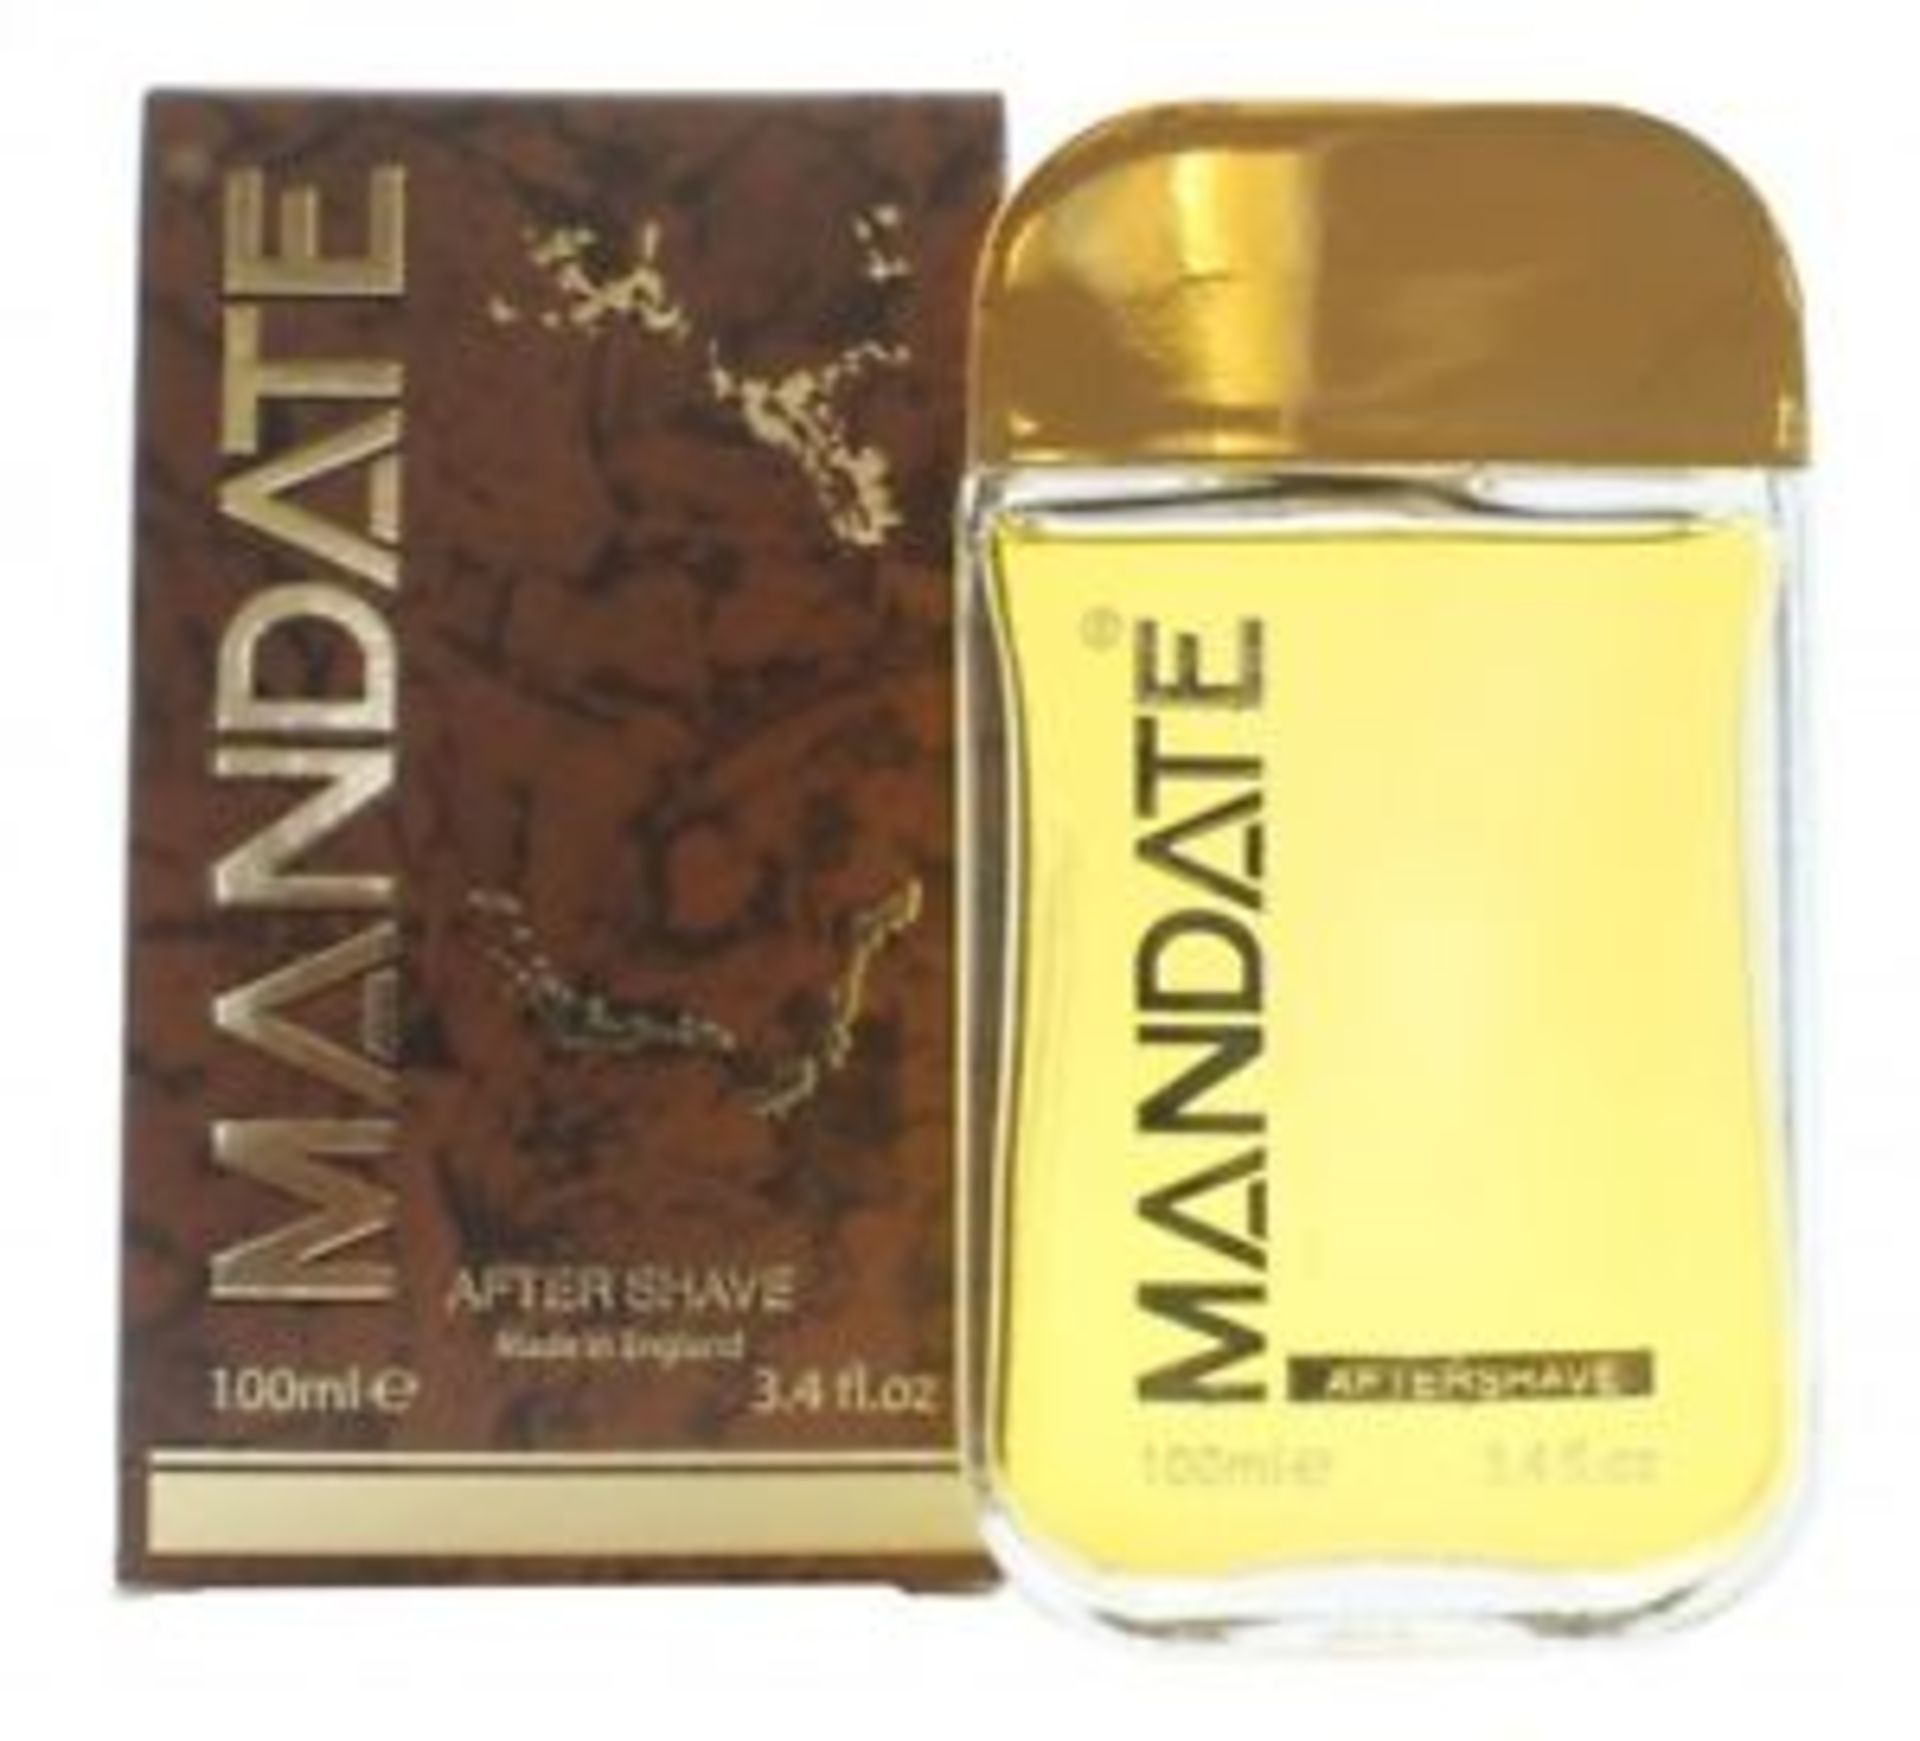 V Brand New EDEN CLASSICEden Classic Mandate 100ml Aftershave